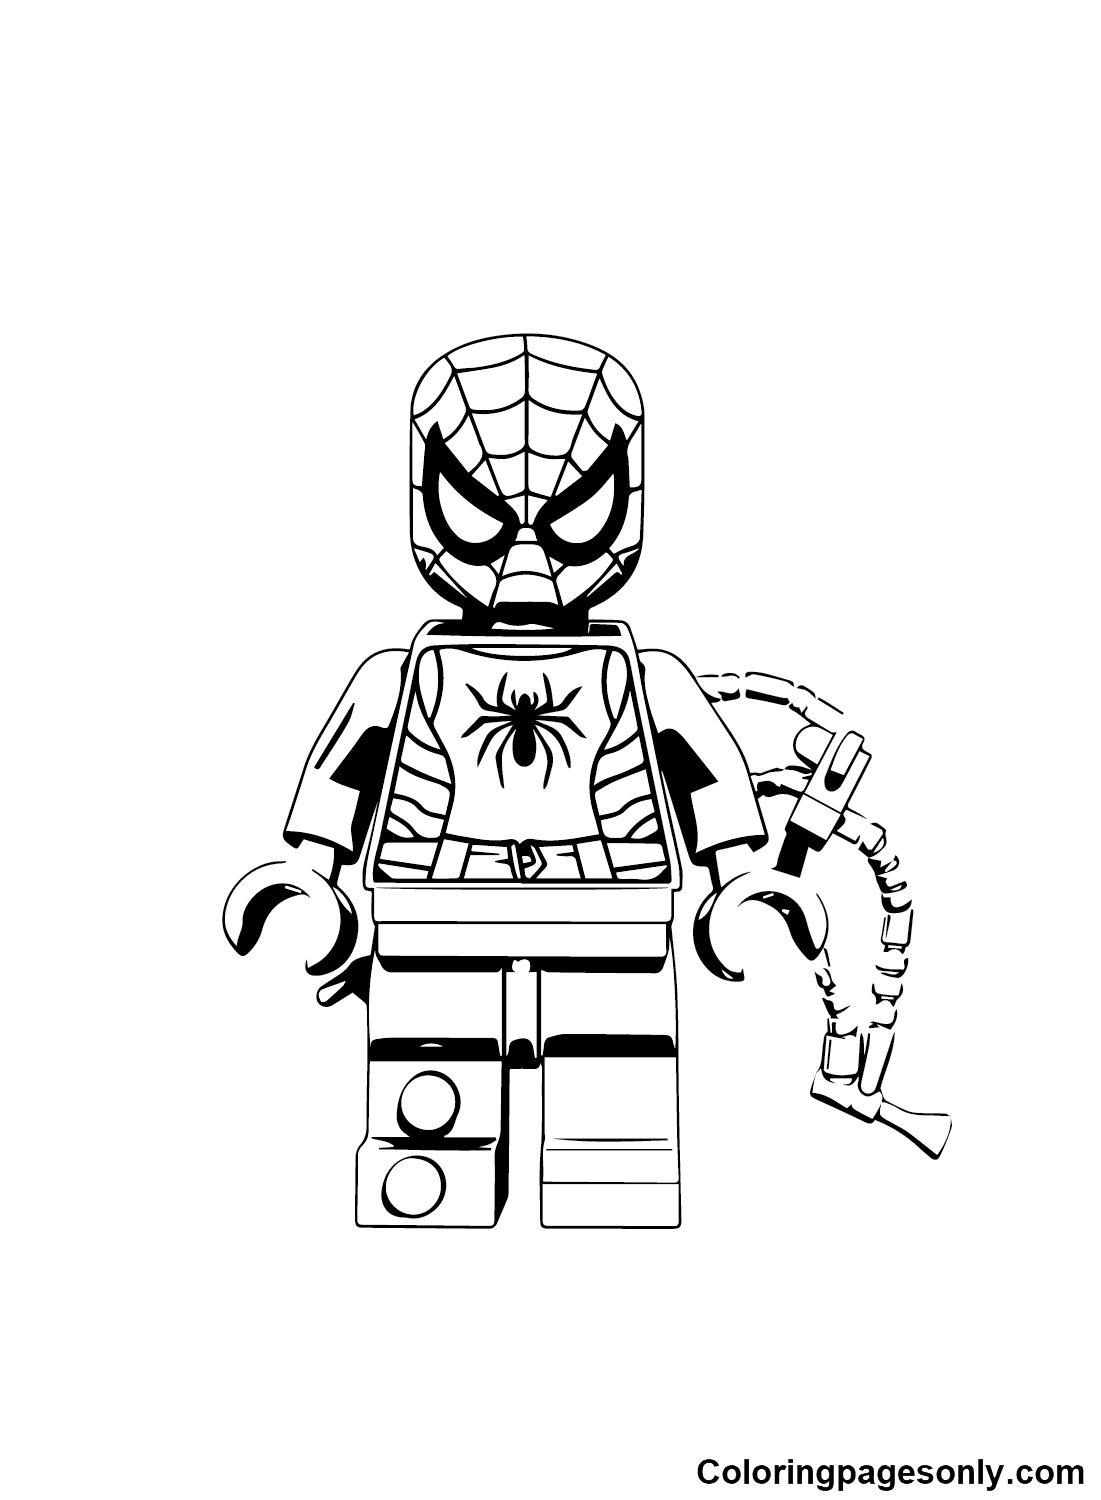 Lego Marvel Spiderman Coloring Pages